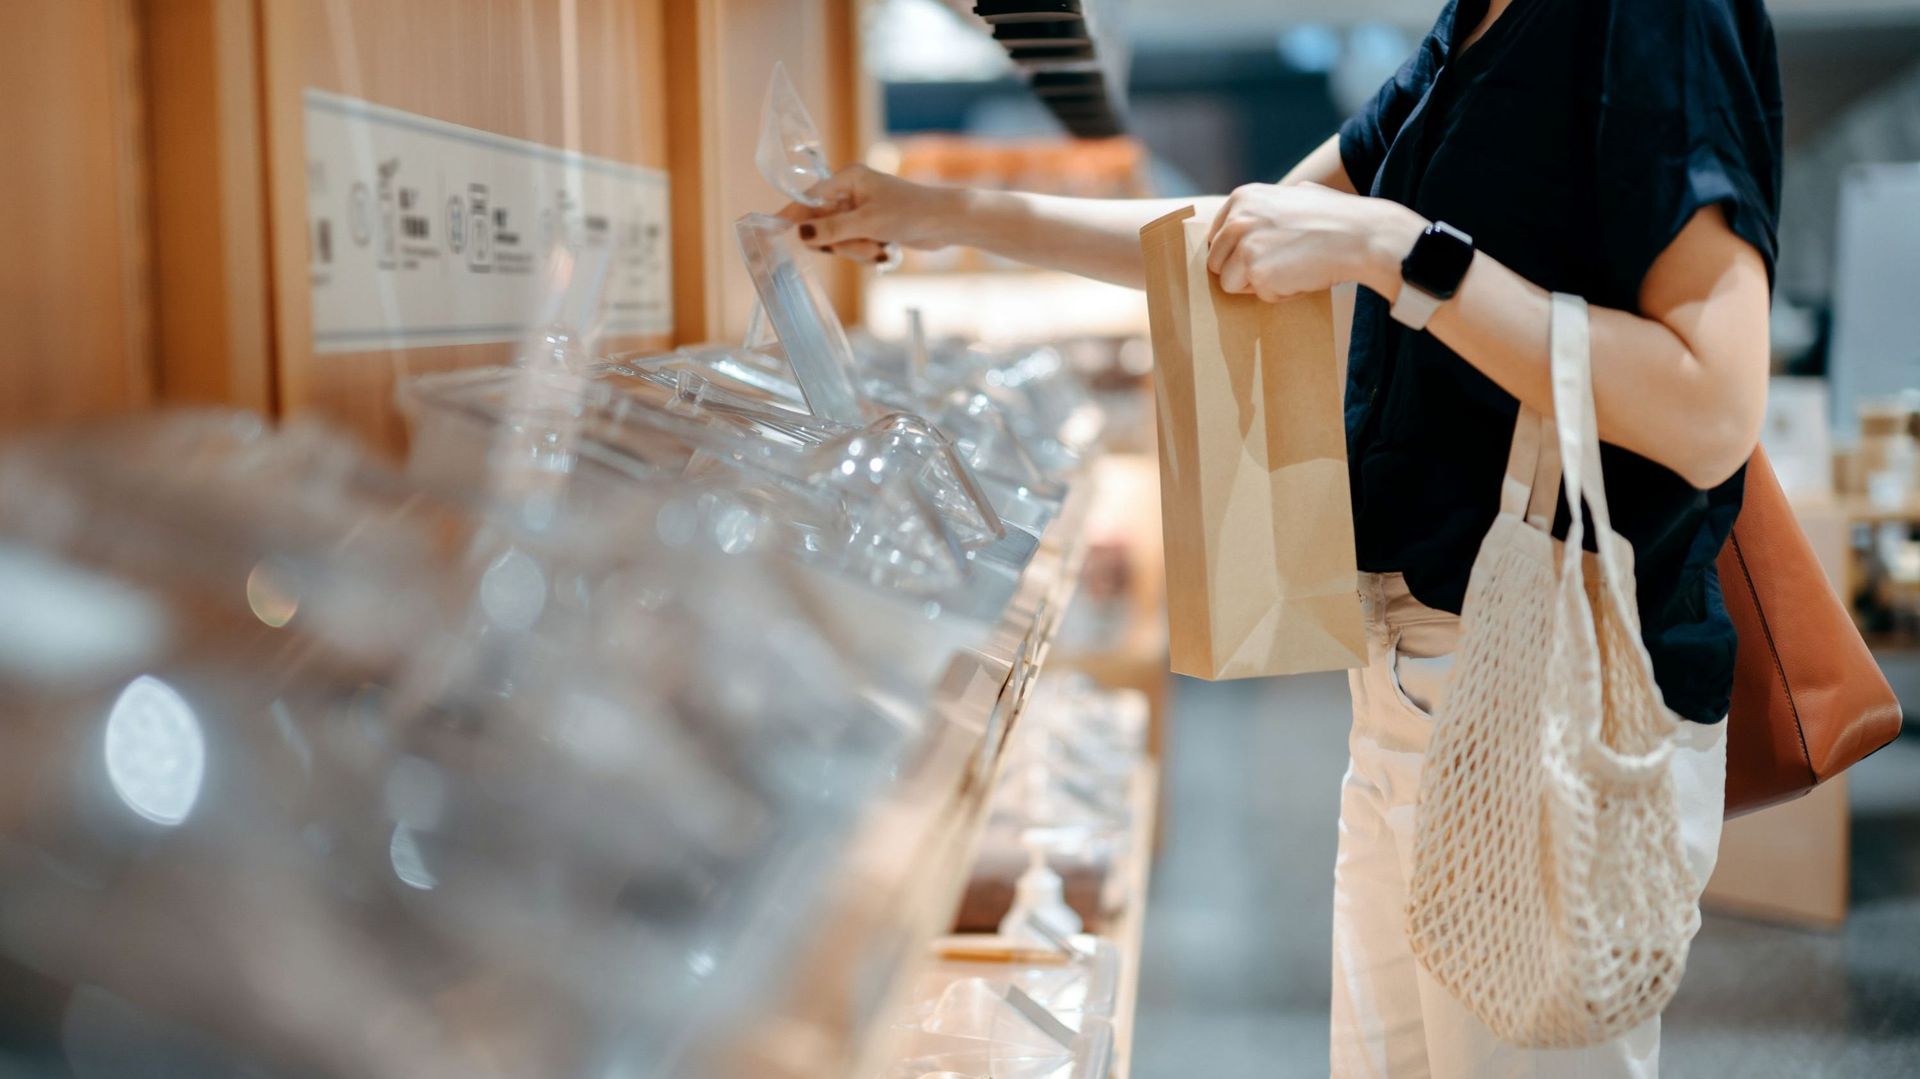 Young Asian woman carrying reusable cotton mesh bag doing grocery shopping, holding a paper bag and self-serving in a package-free organic whole foods refill store. Zero waste, plastic free, ecologically friendly, green living and sustainable lifestyle